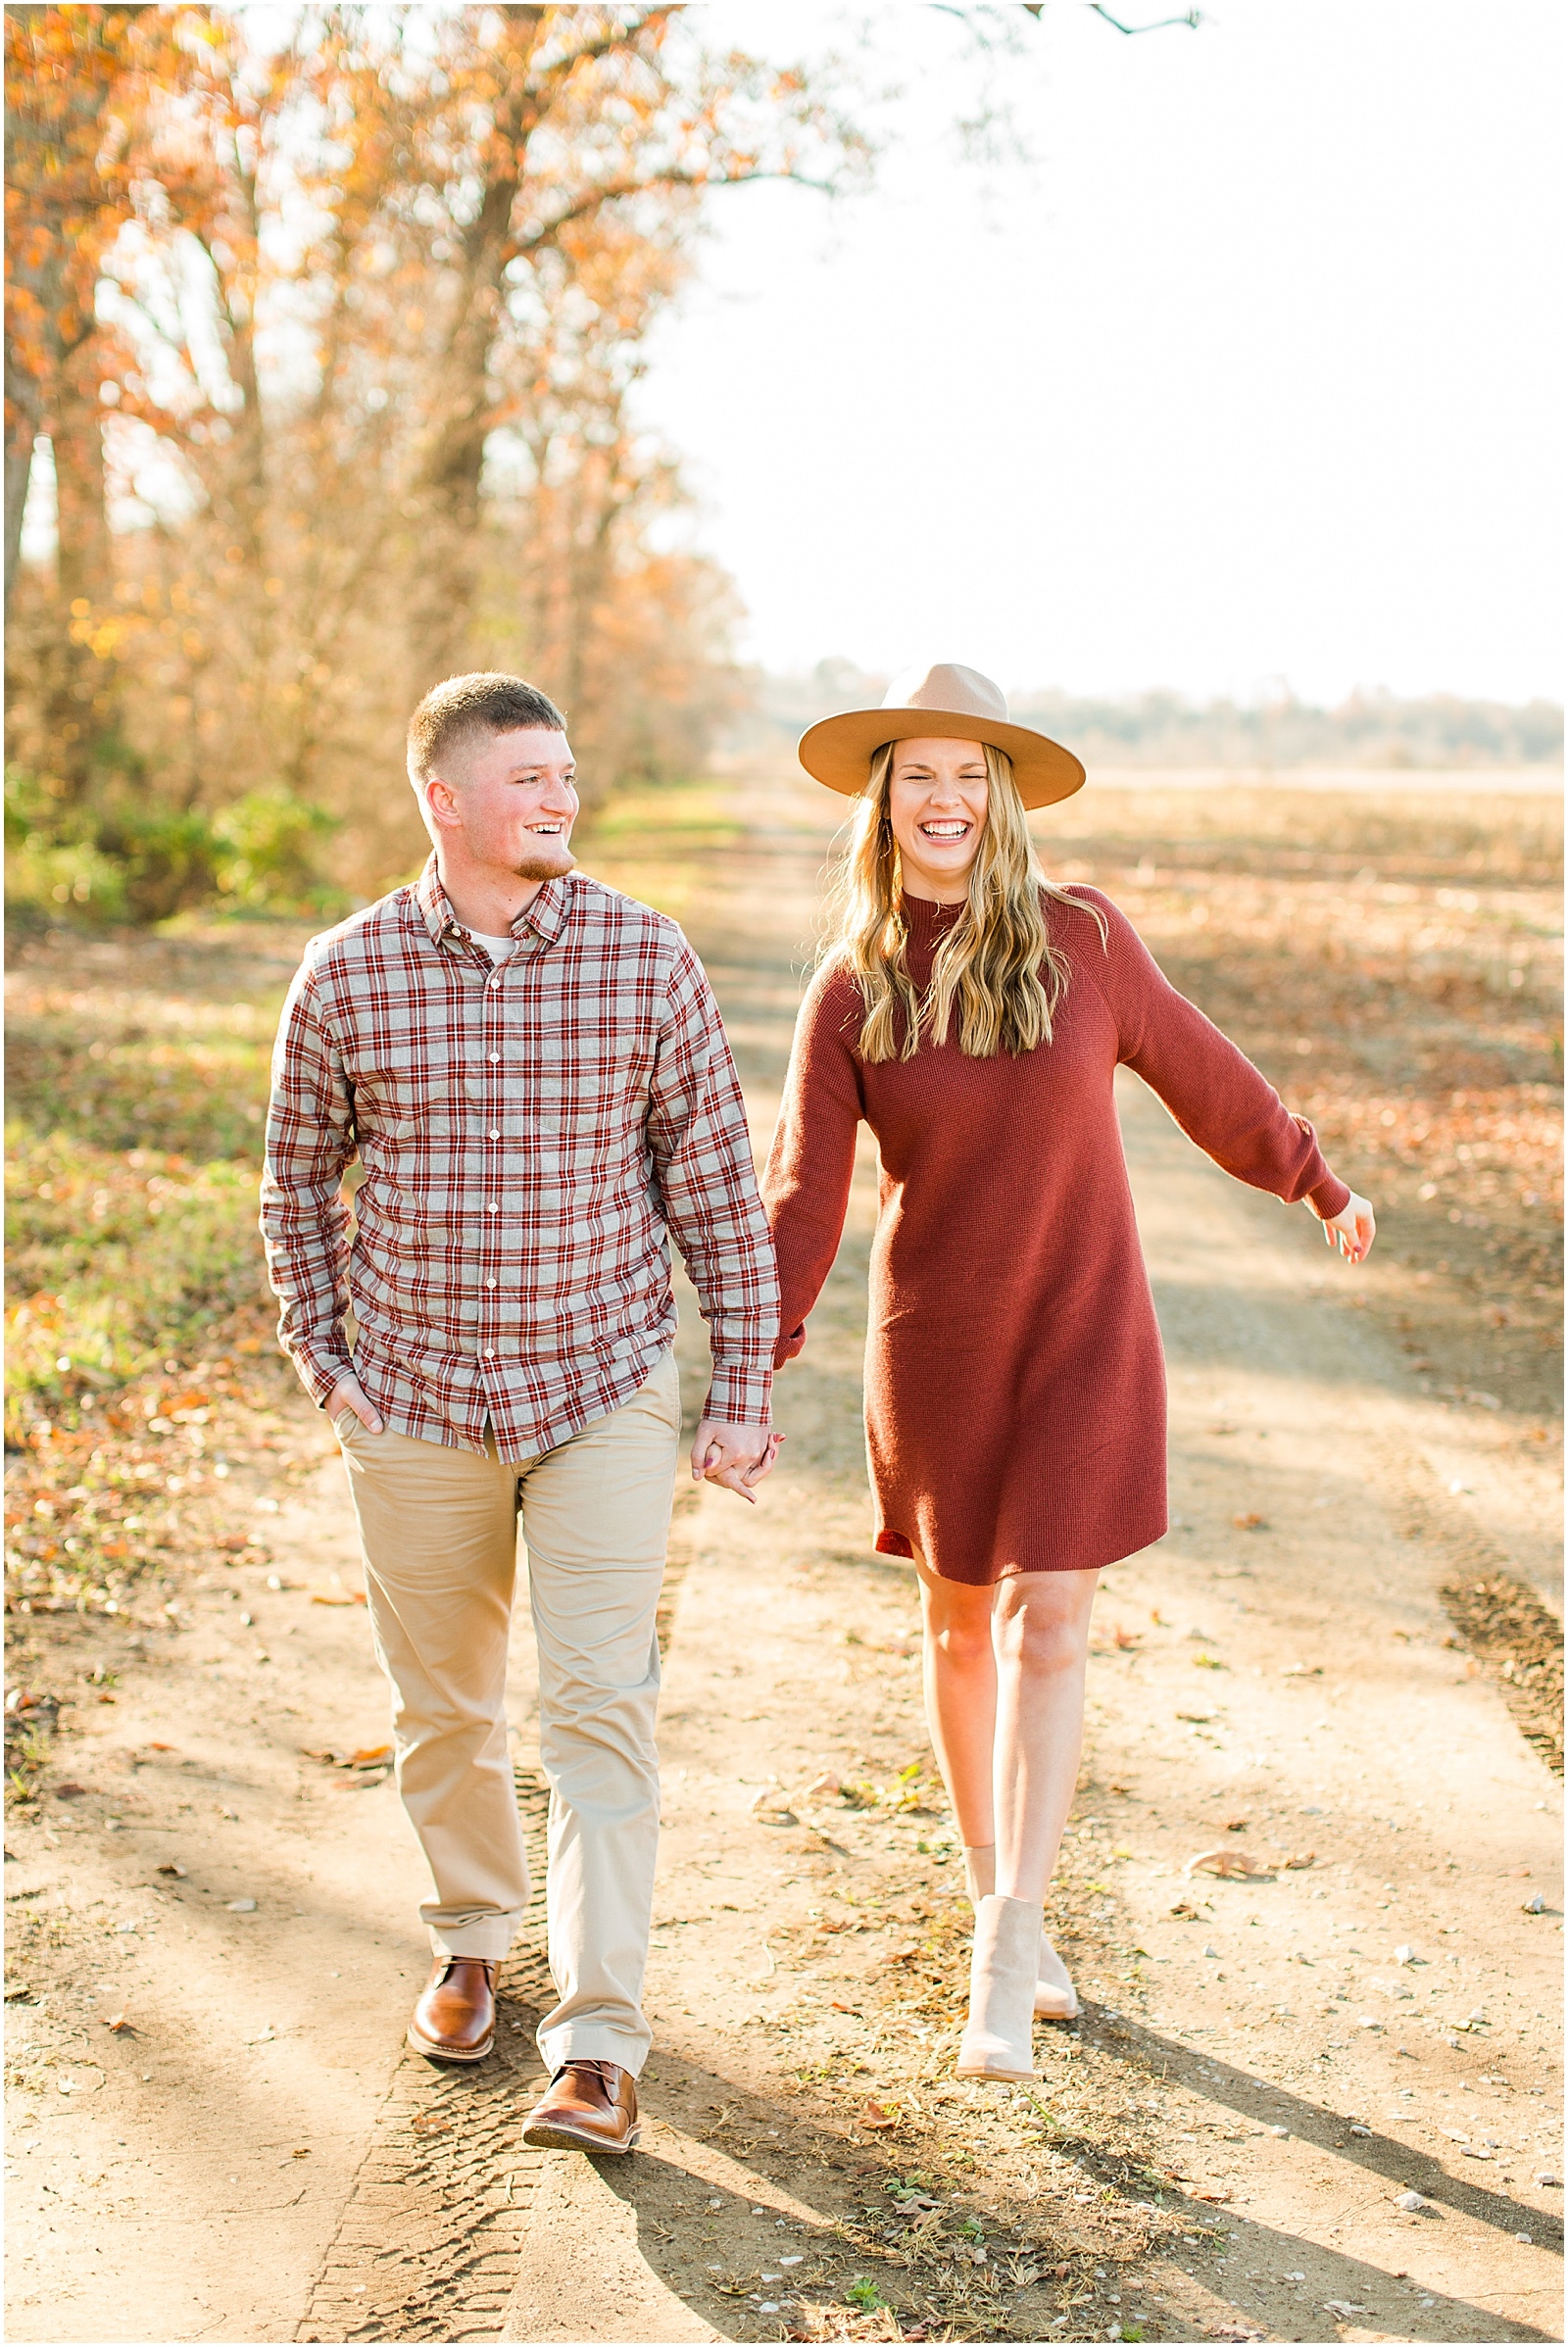 A Fall Southern Indiana Engagement Seesion | Cody and Hannah | Bret and Brandie Photography 006.jpg